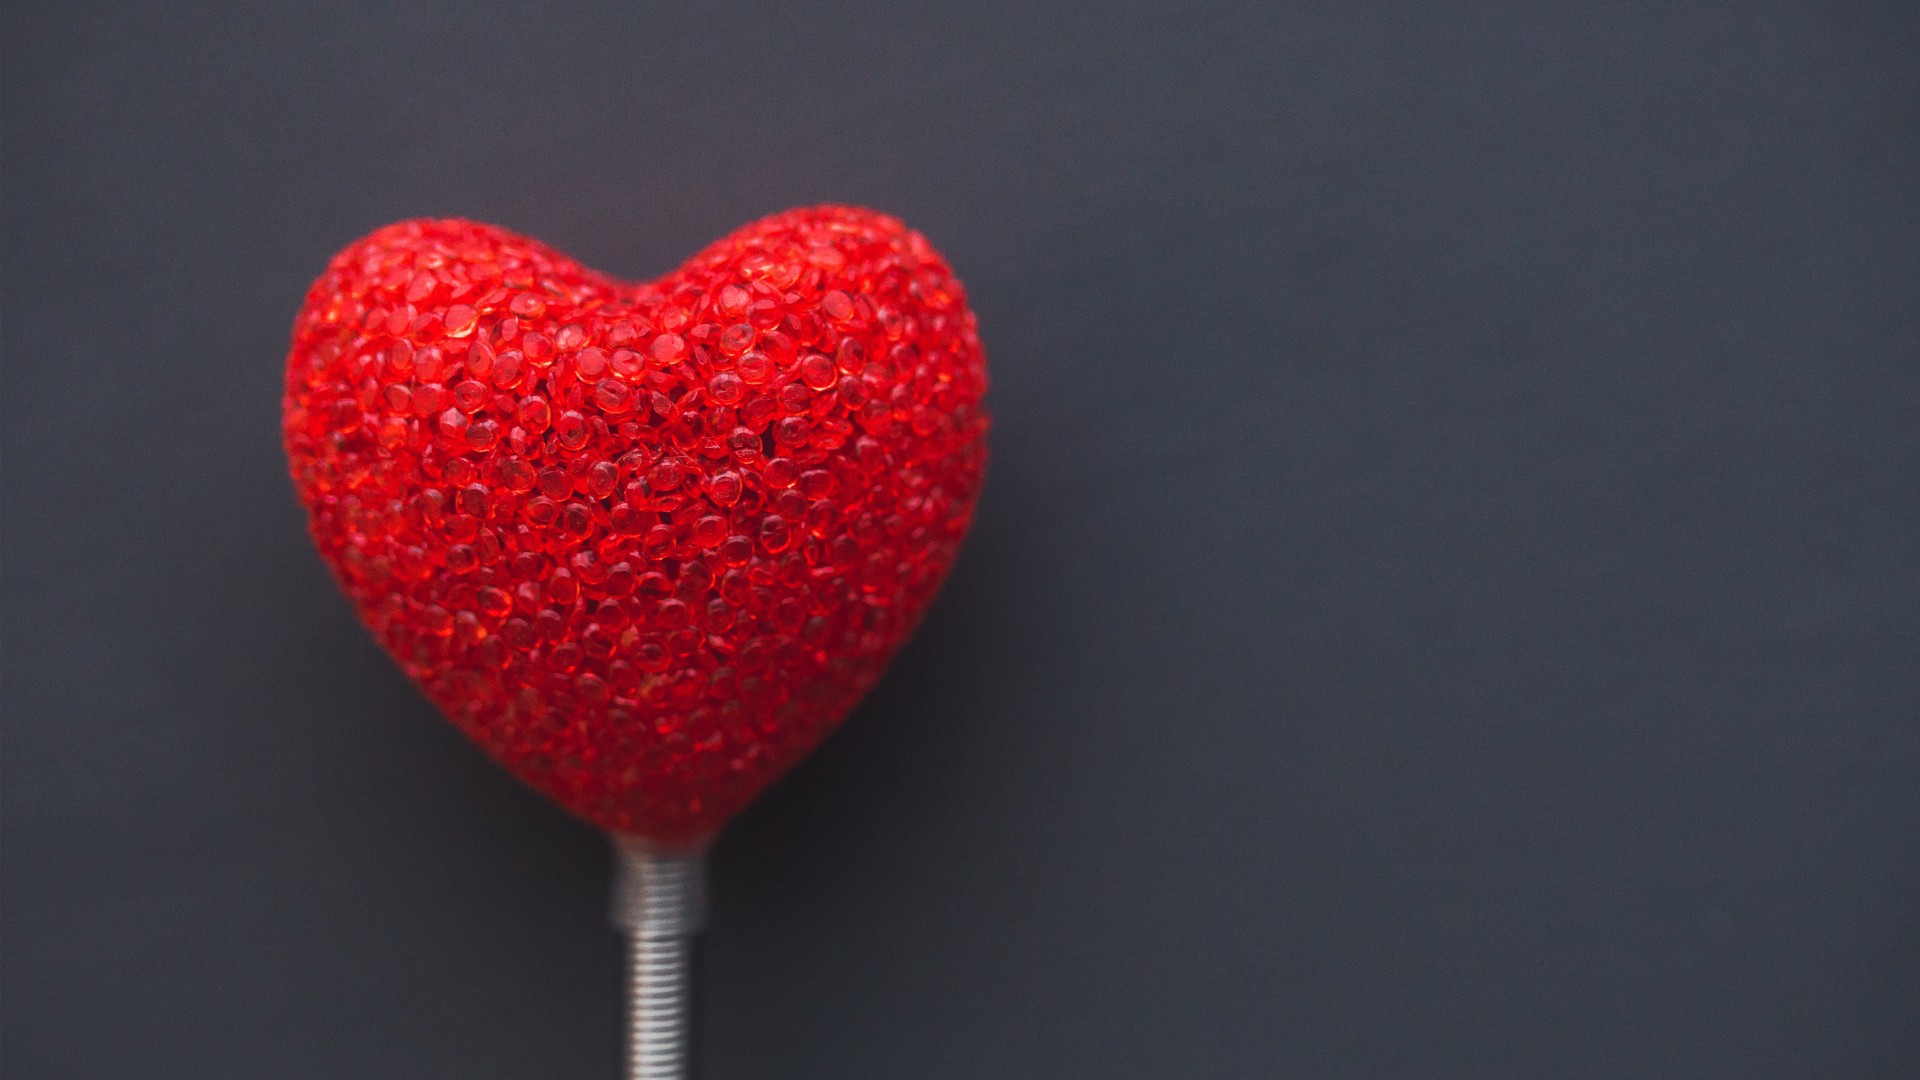 Red Heart Candy Download Free Image